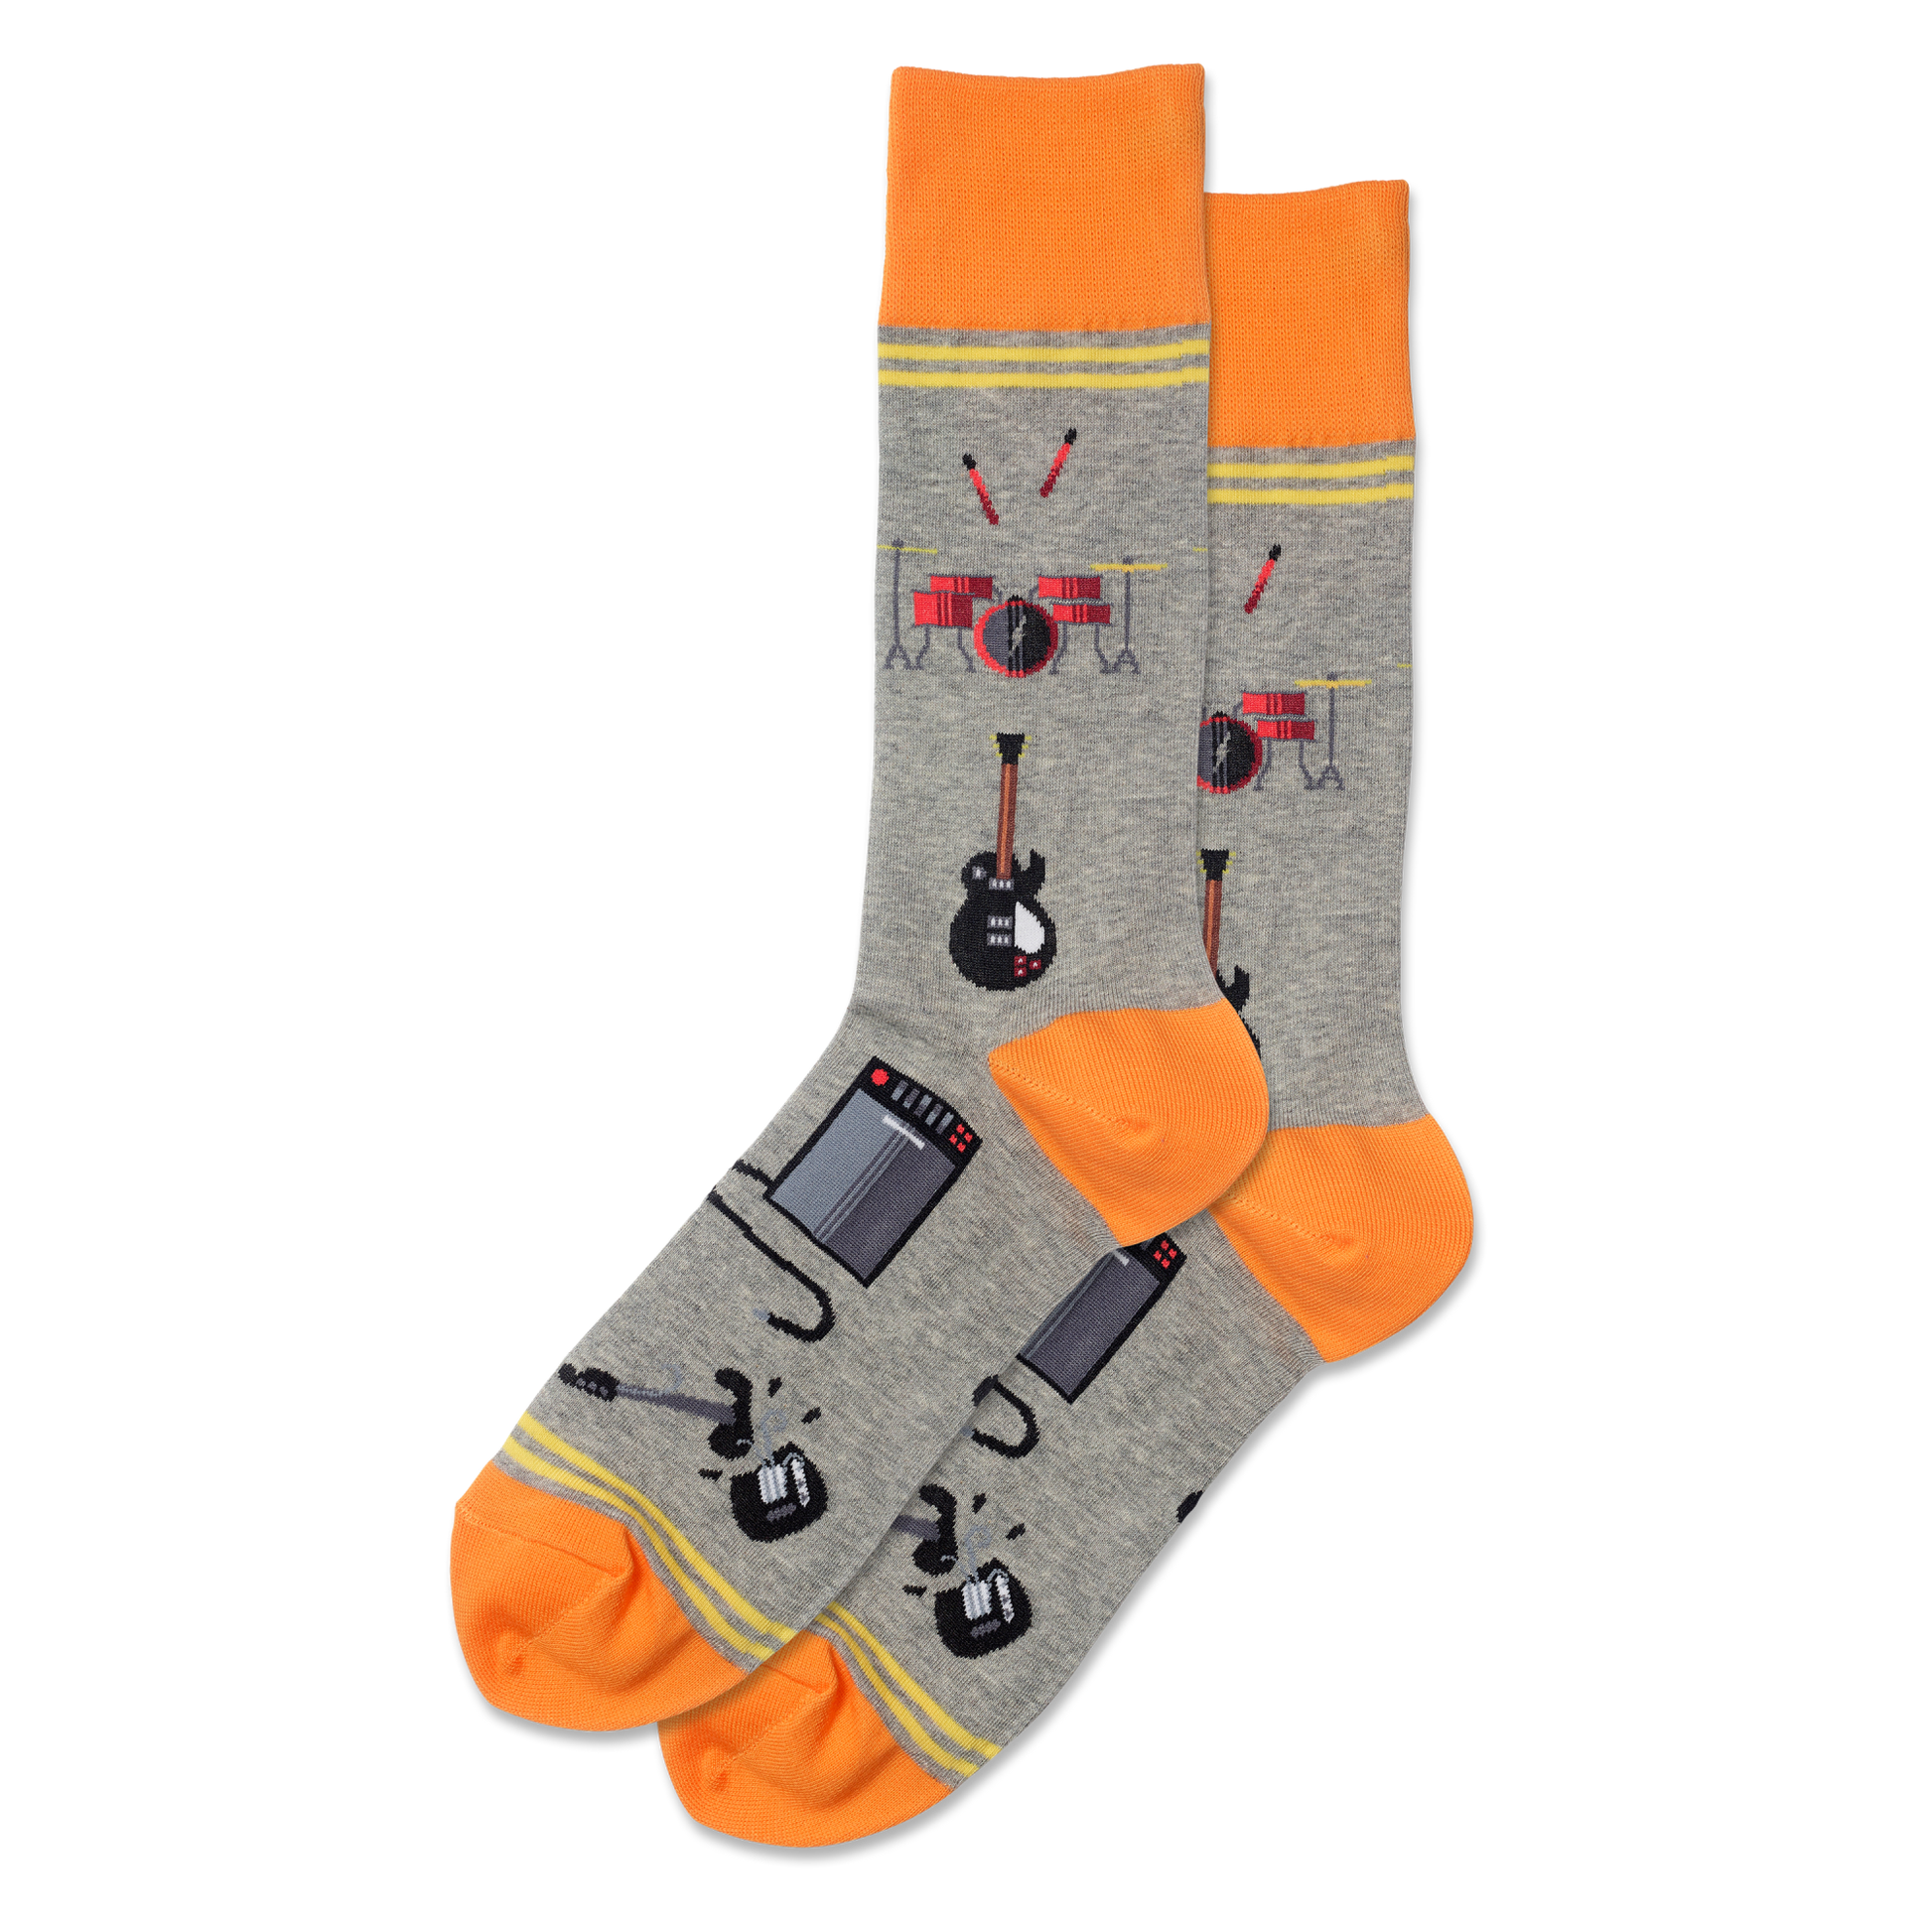 men's garage brand socks are gray and orange with guitars, amps, and drums all over and displayed against a white background